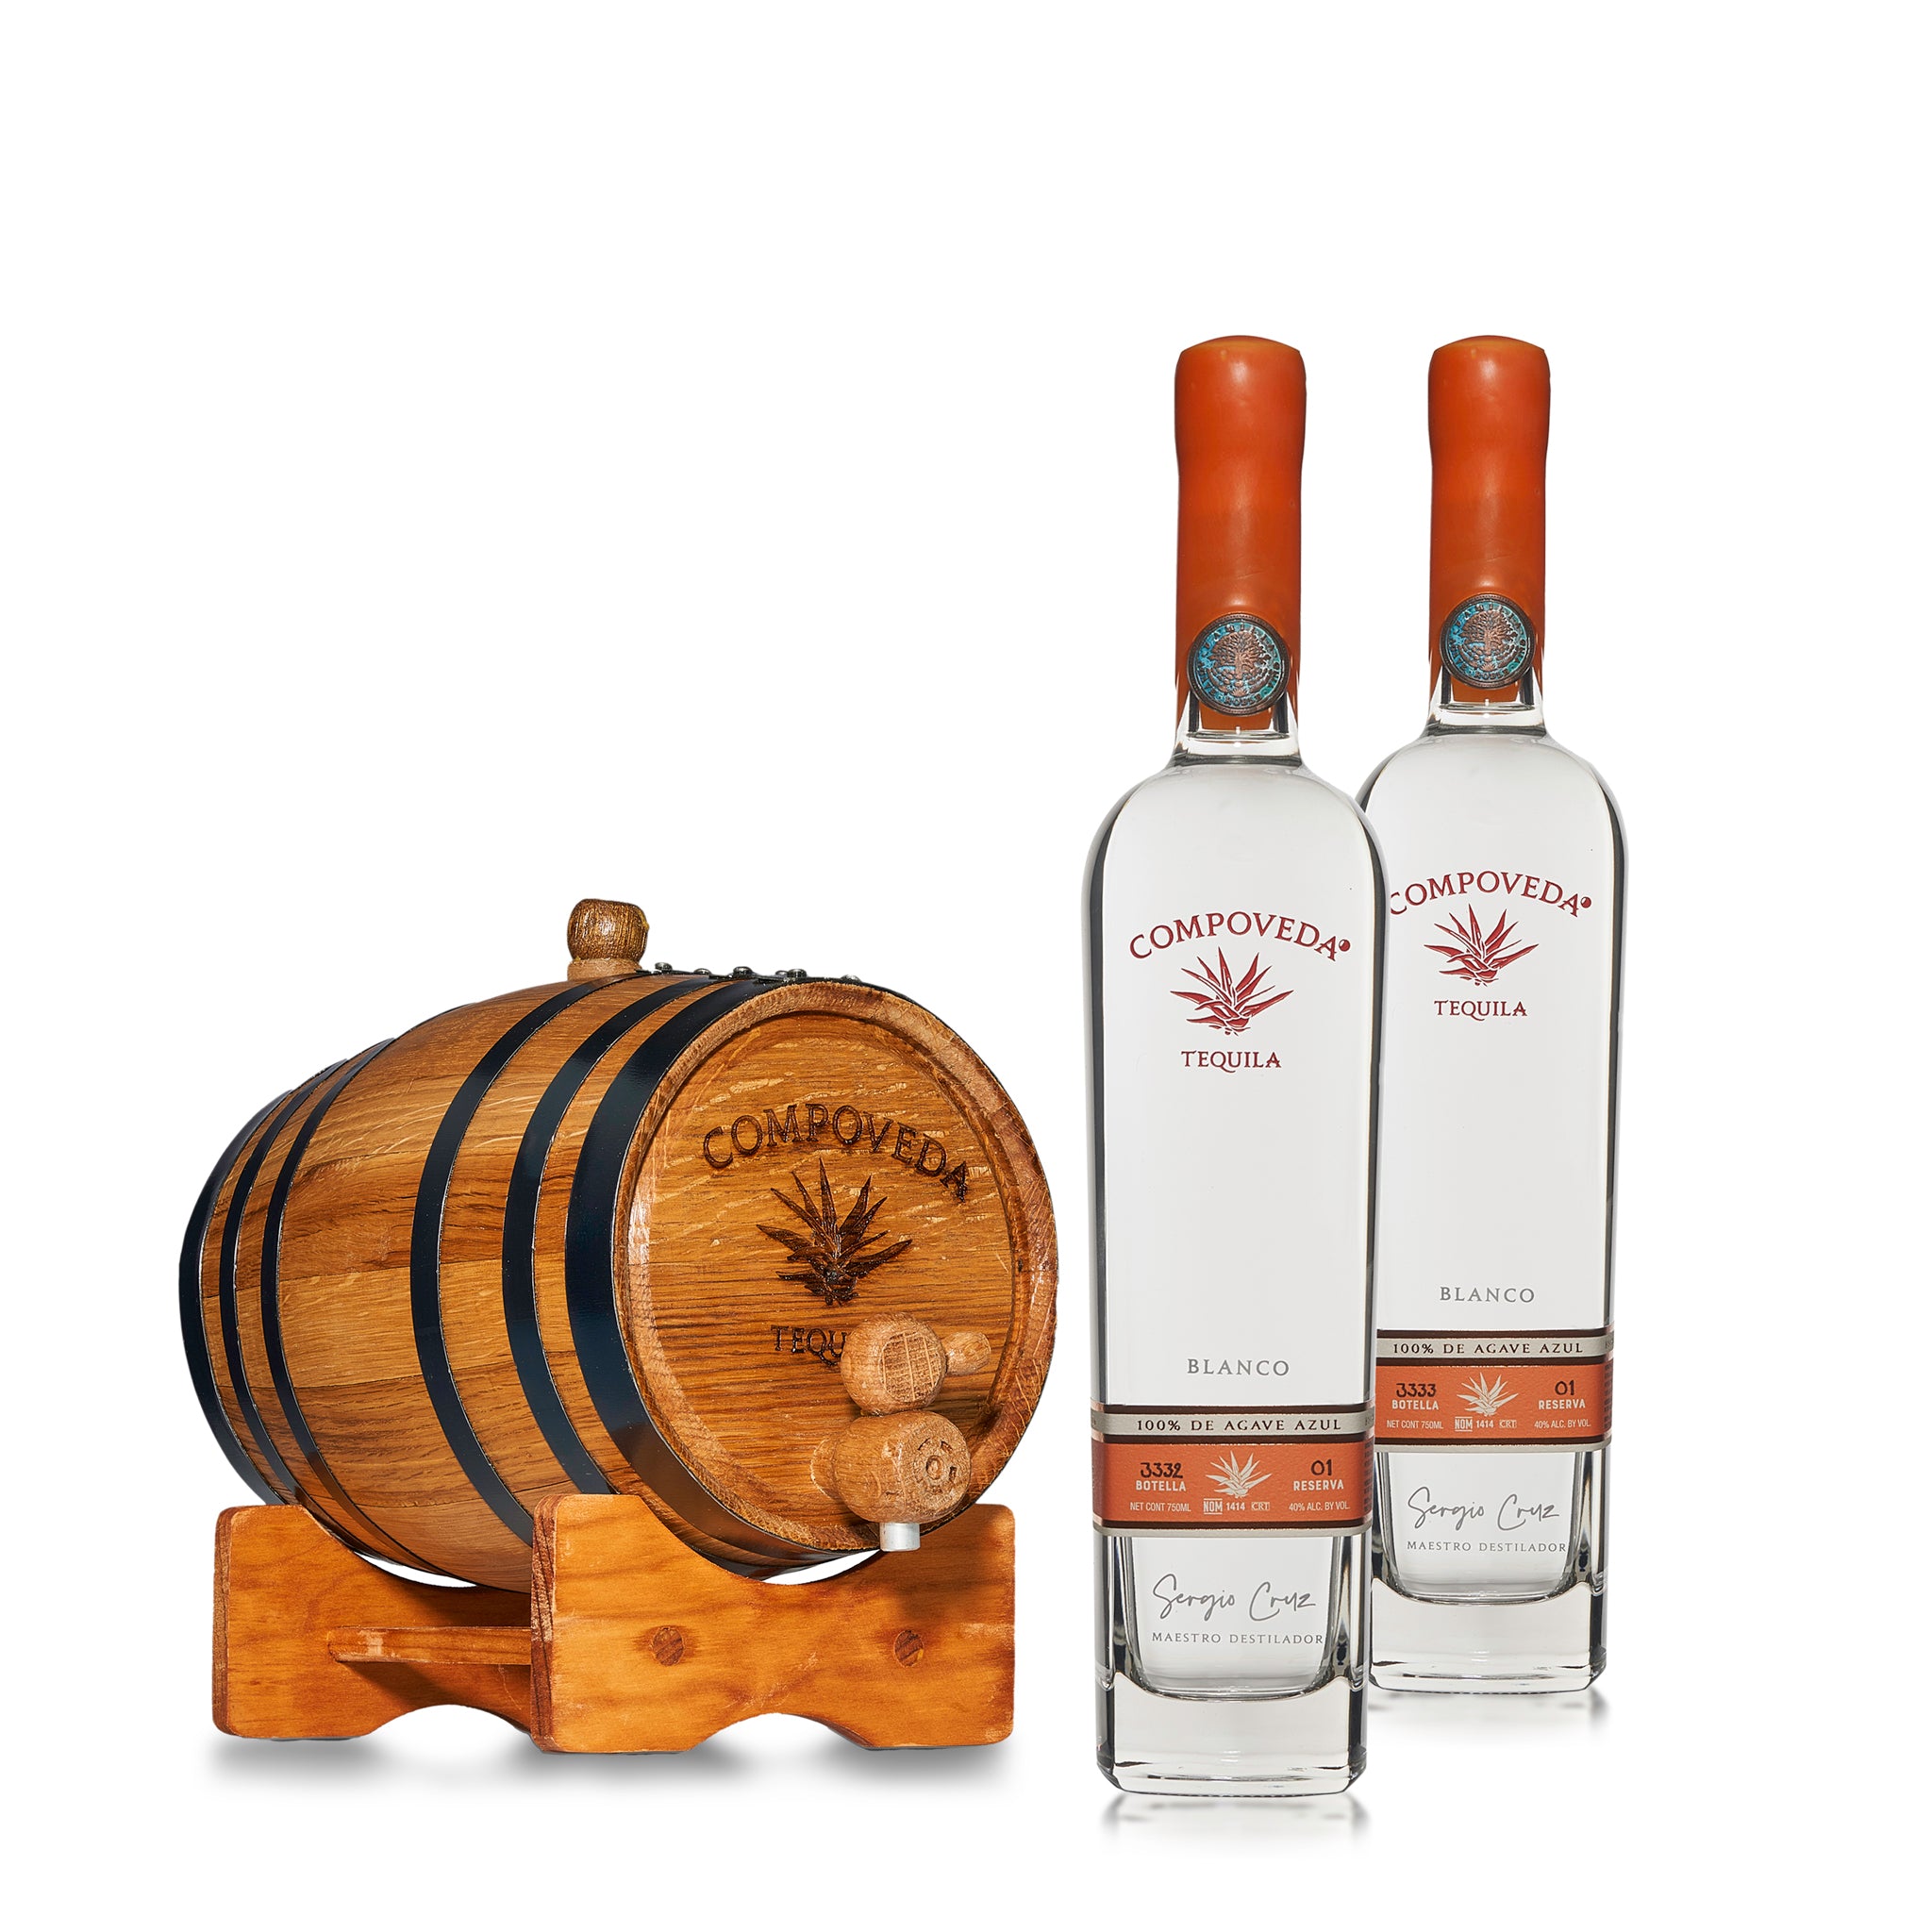 Compoveda Cask Collection